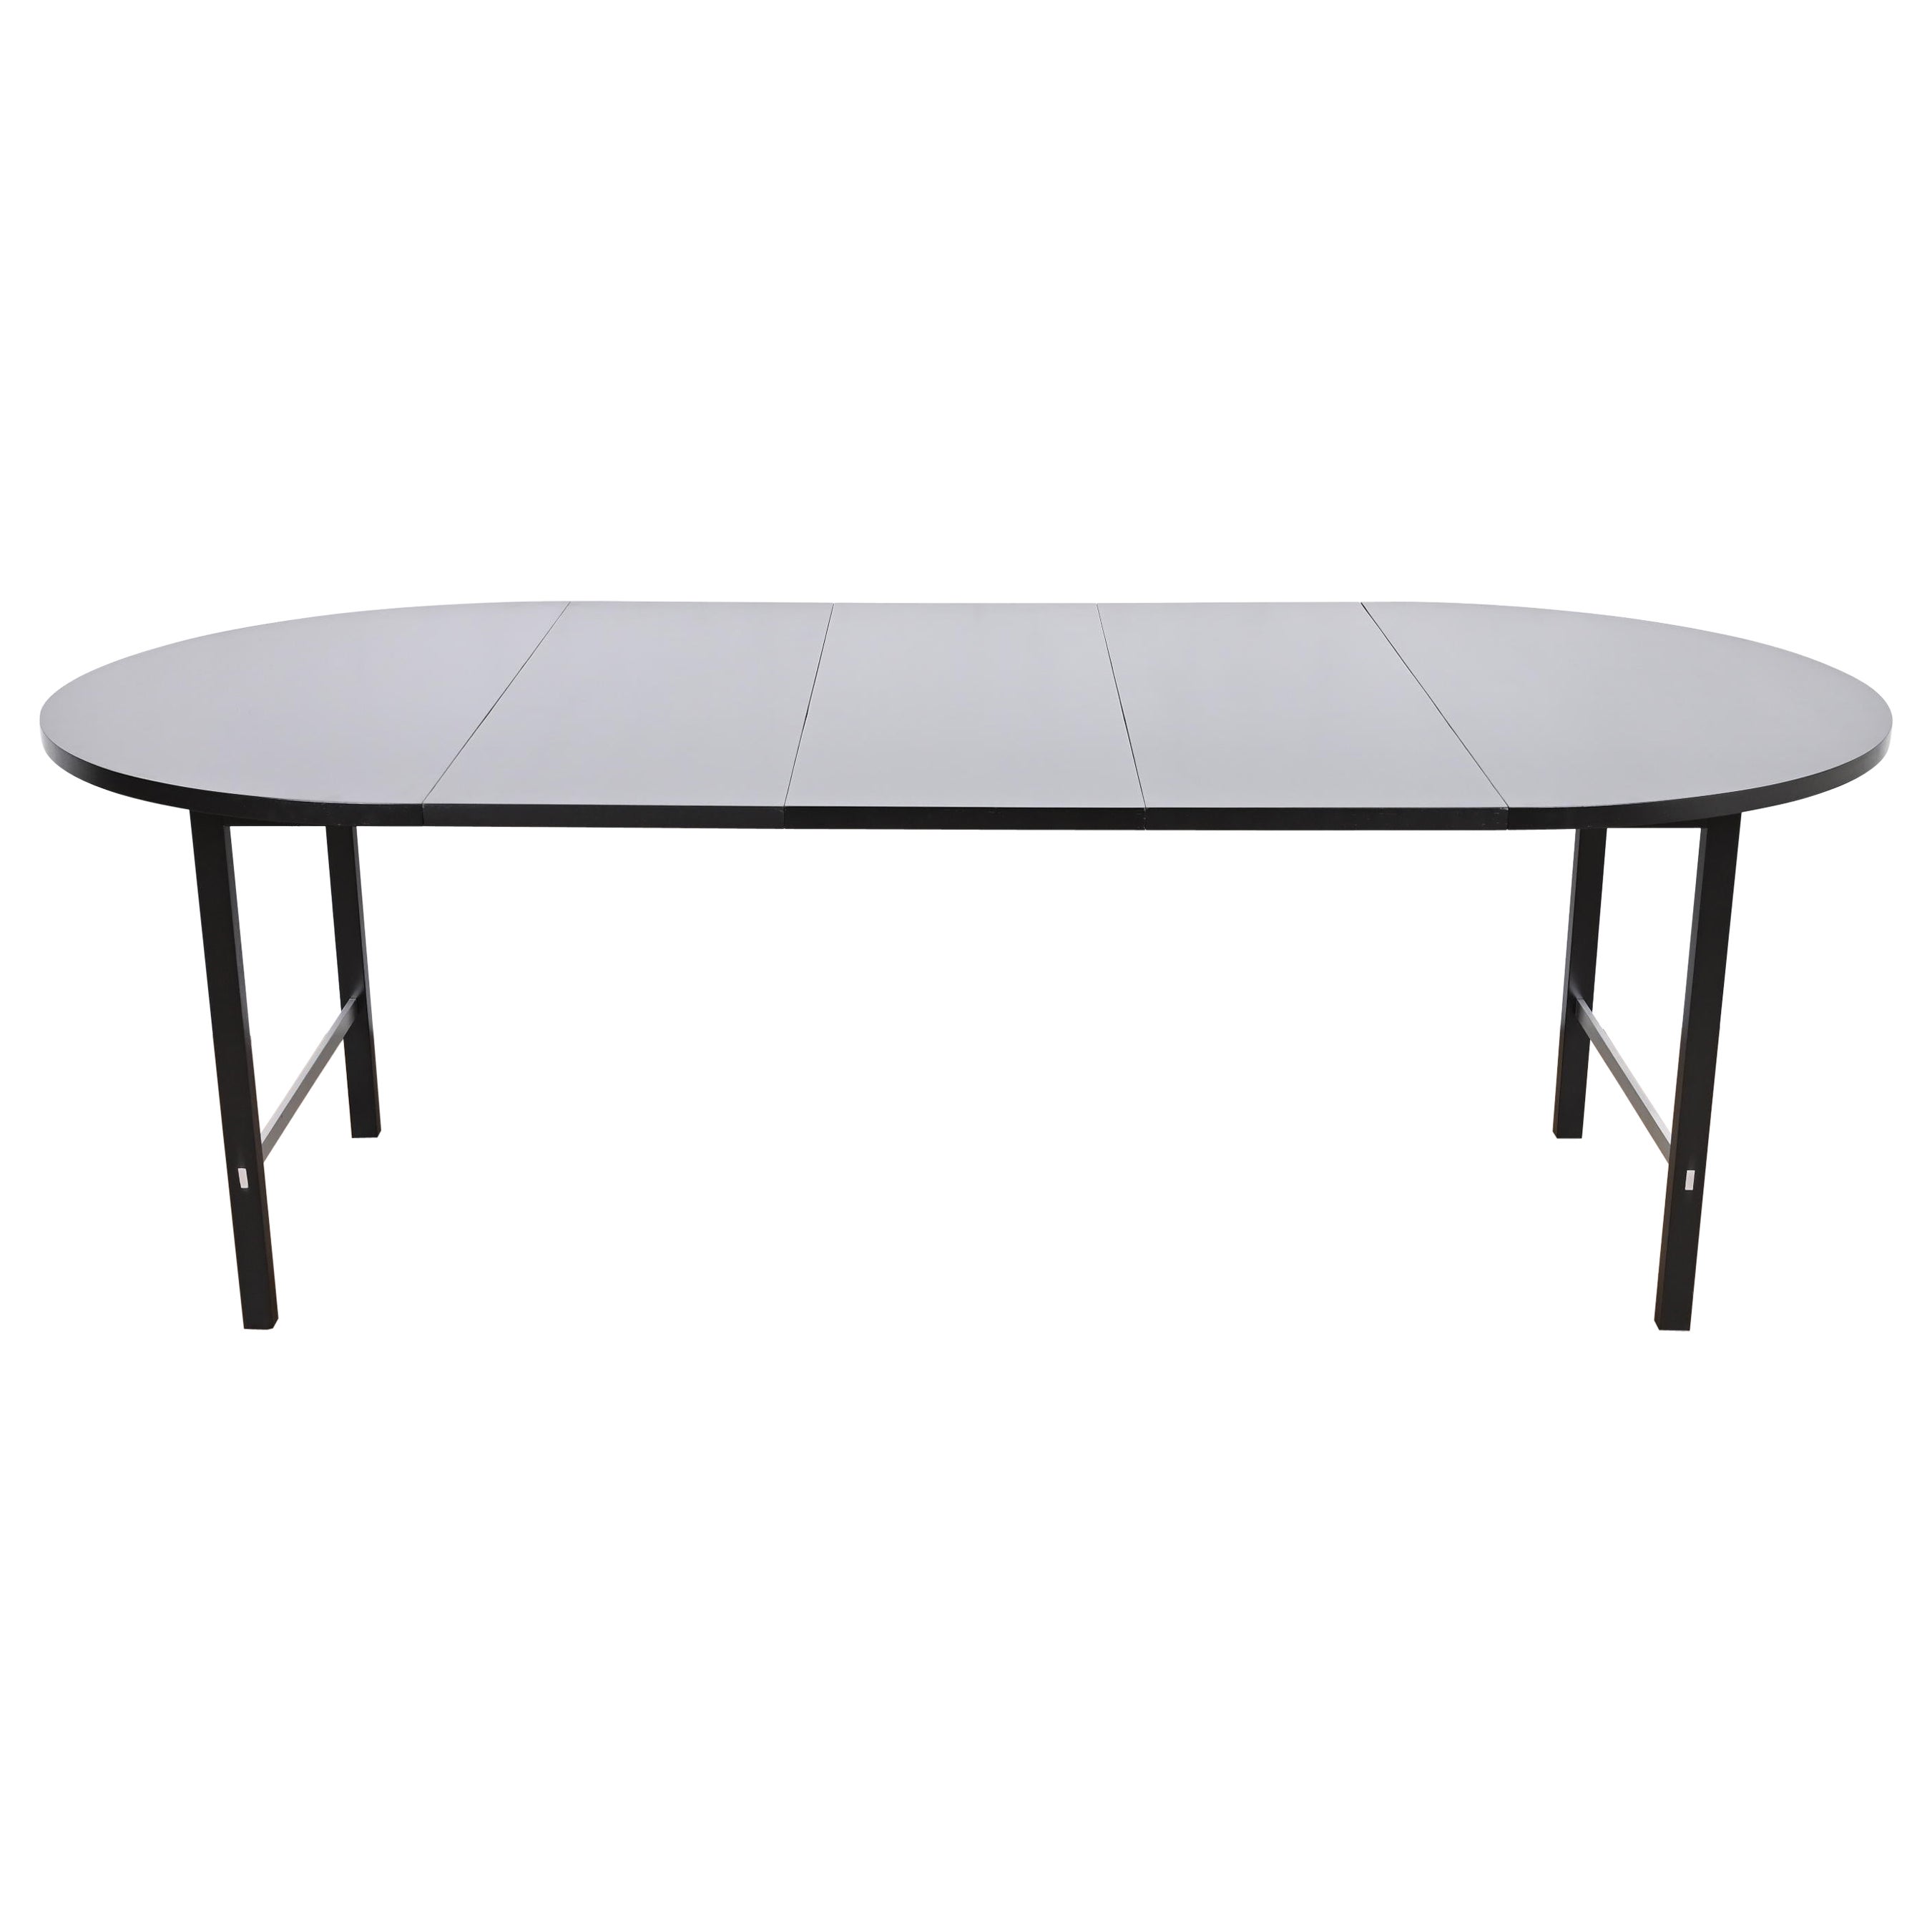 Paul McCobb for Calvin Black Lacquered Extension Dining Table, Newly Refinished For Sale